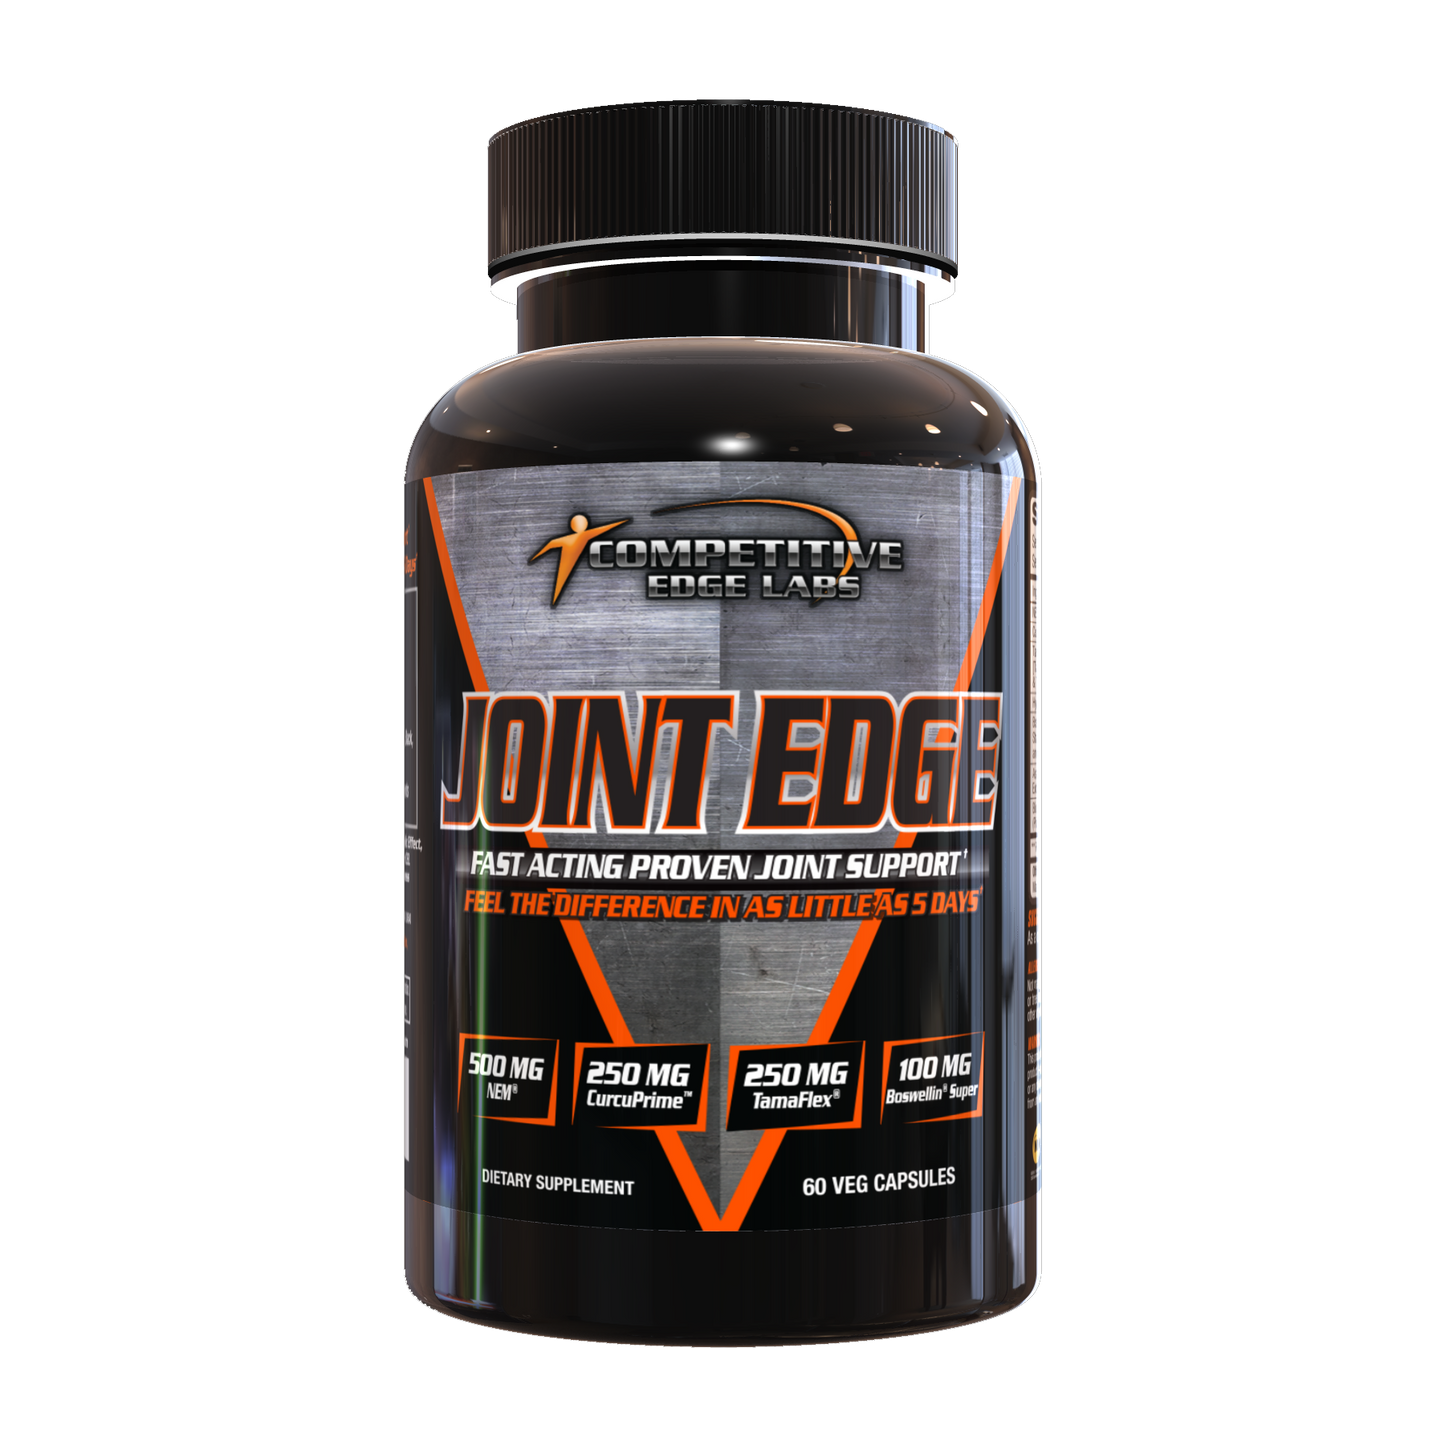 Competitive Edge Joint Edge front bottle